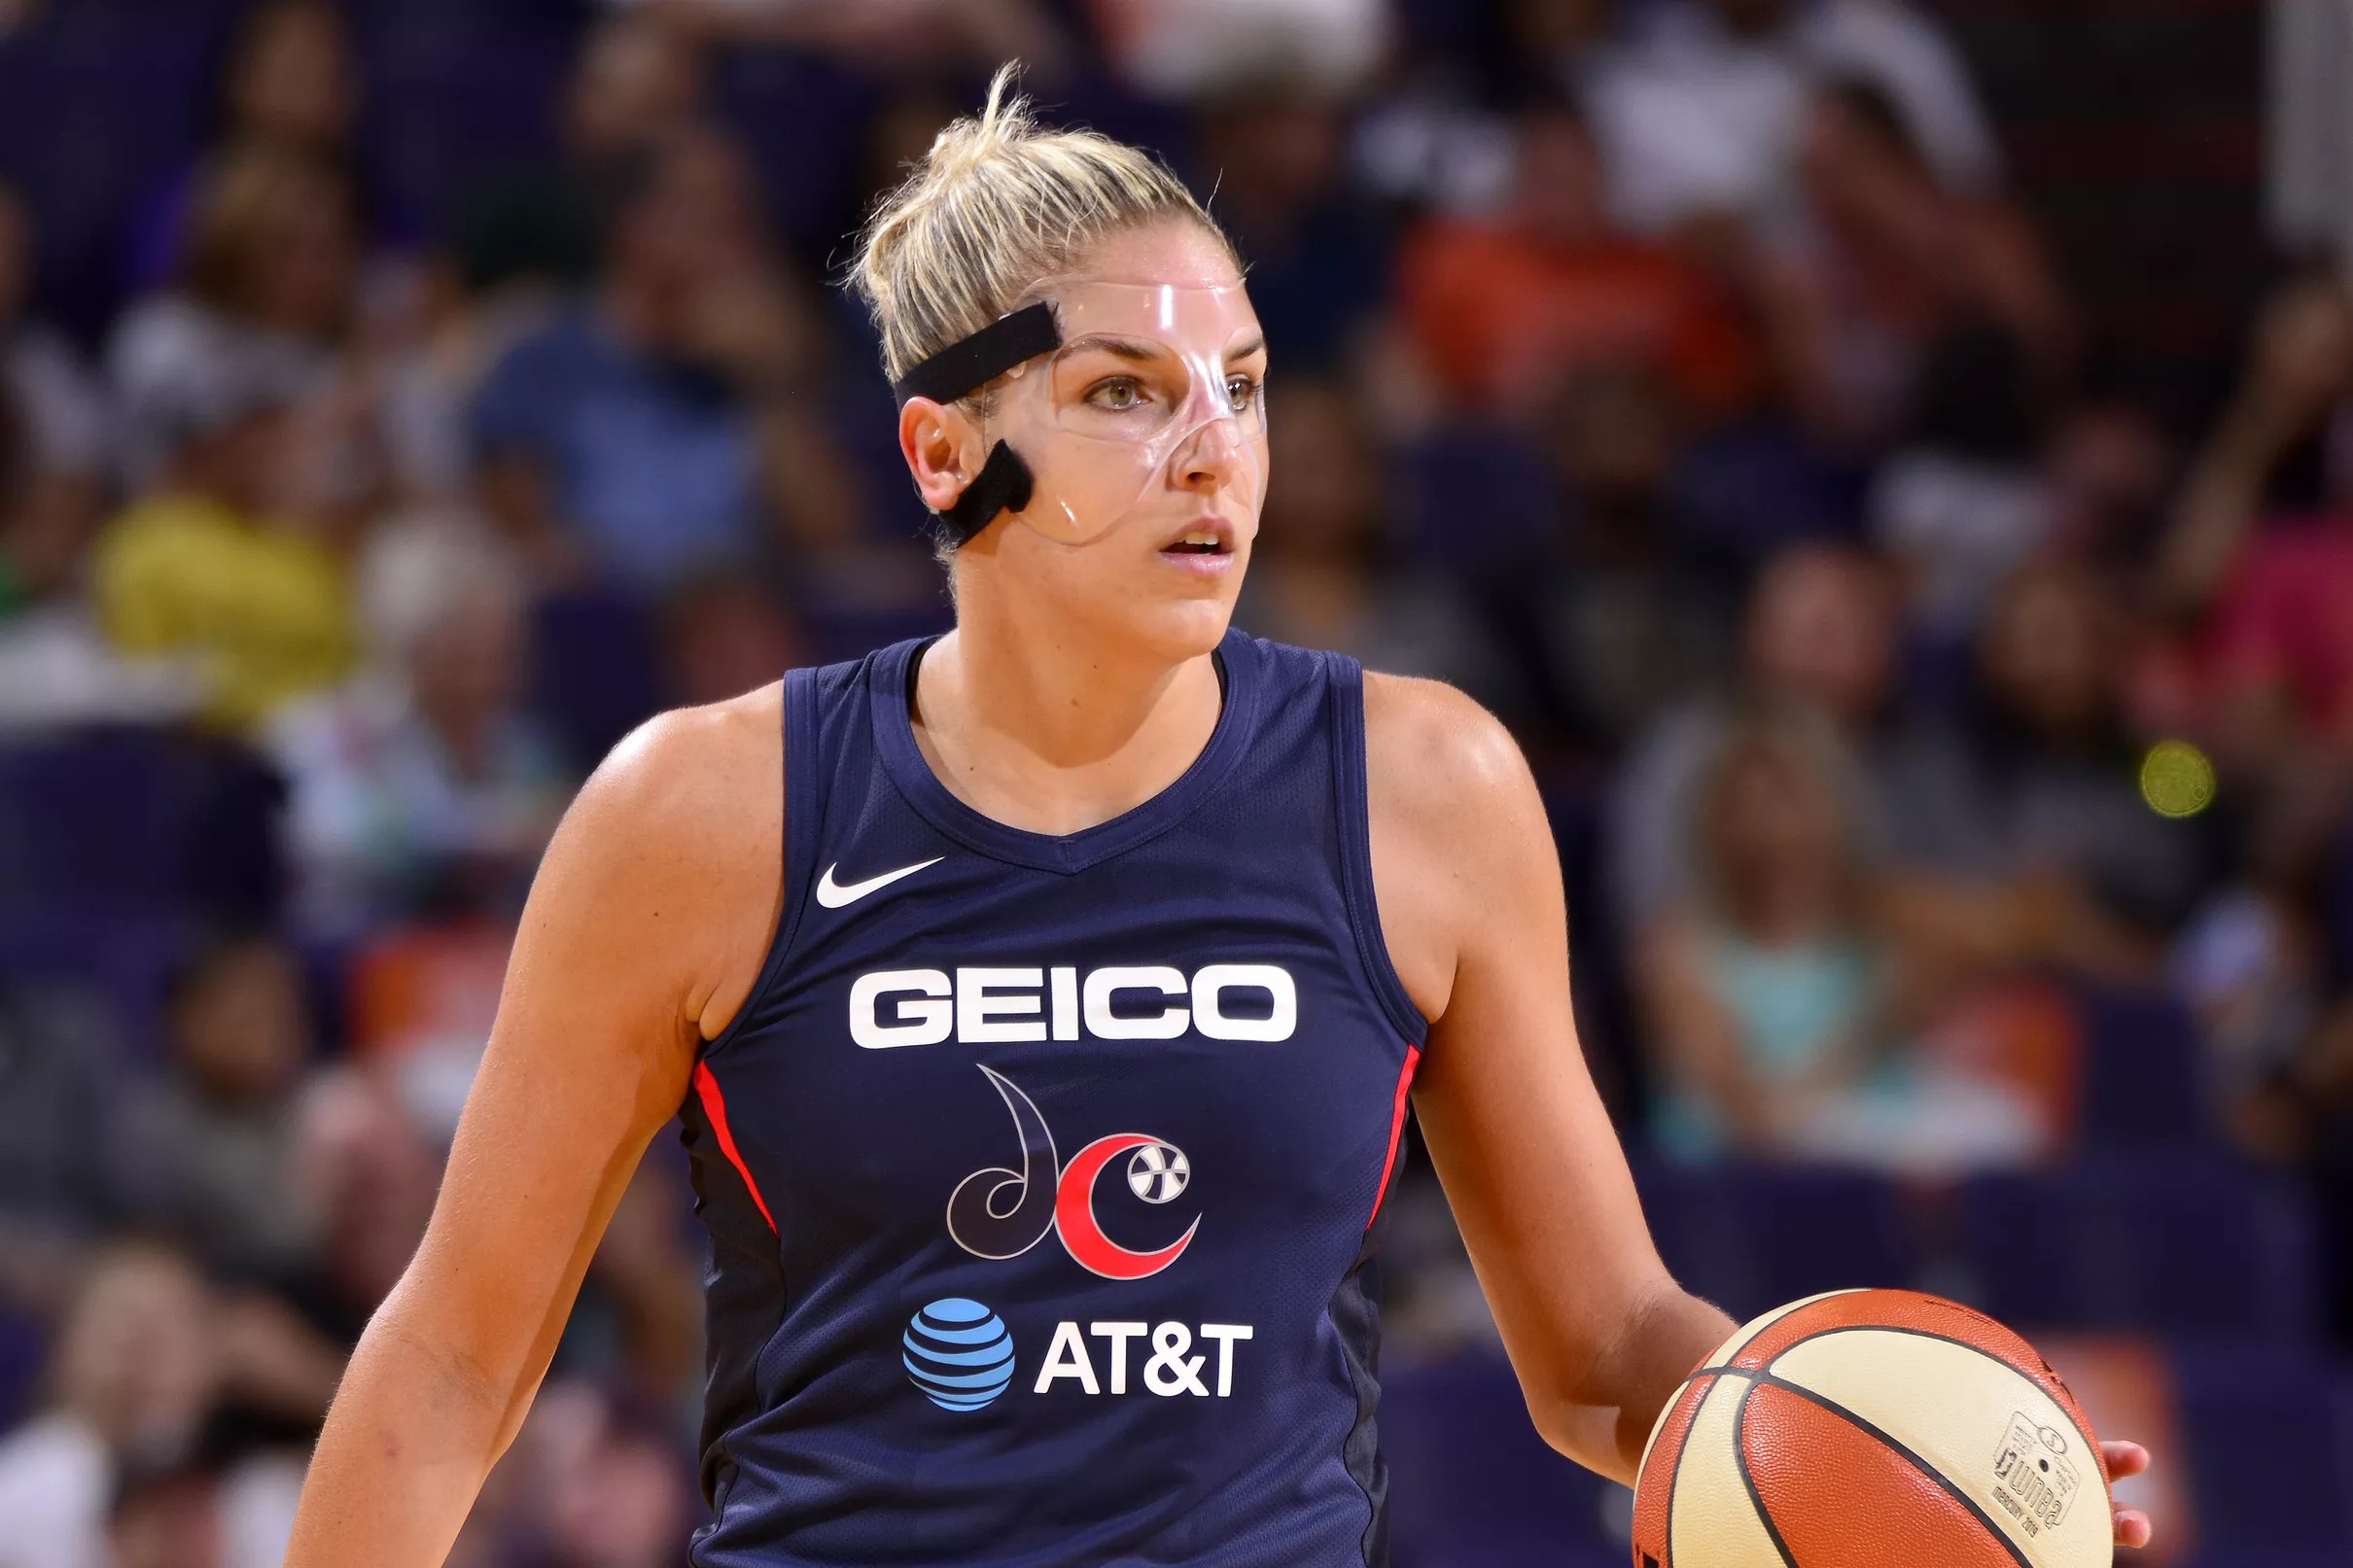 Elena Delle Donne wins the WNBA Player of the Week award. Again!